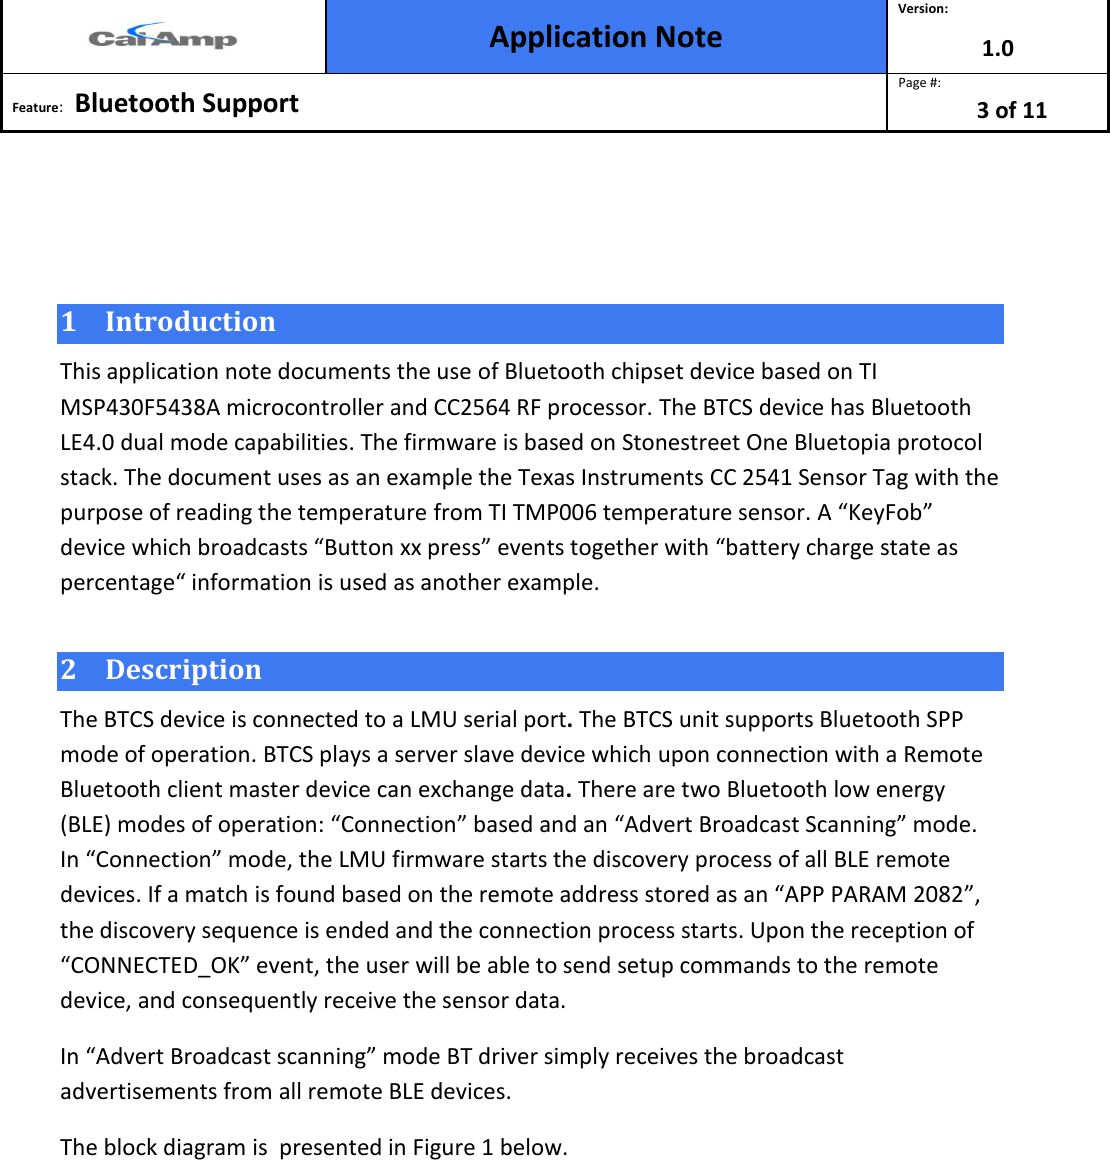  Application Note Version: 1.0  Feature:   Bluetooth Support  Page #: 3 of 11     1 Introduction This application note documents the use of Bluetooth chipset device based on TI MSP430F5438A microcontroller and CC2564 RF processor. The BTCS device has Bluetooth LE4.0 dual mode capabilities. The firmware is based on Stonestreet One Bluetopia protocol stack. The document uses as an example the Texas Instruments CC 2541 Sensor Tag with the purpose of reading the temperature from TI TMP006 temperature sensor. A “KeyFob” device which broadcasts “Button xx press” events together with “battery charge state as percentage“ information is used as another example.  2 Description  The BTCS device is connected to a LMU serial port. The BTCS unit supports Bluetooth SPP mode of operation. BTCS plays a server slave device which upon connection with a Remote Bluetooth client master device can exchange data. There are two Bluetooth low energy (BLE) modes of operation: “Connection” based and an “Advert Broadcast Scanning” mode. In “Connection” mode, the LMU firmware starts the discovery process of all BLE remote devices. If a match is found based on the remote address stored as an “APP PARAM 2082”, the discovery sequence is ended and the connection process starts. Upon the reception of “CONNECTED_OK” event, the user will be able to send setup commands to the remote device, and consequently receive the sensor data.  In “Advert Broadcast scanning” mode BT driver simply receives the broadcast advertisements from all remote BLE devices.  The block diagram is  presented in Figure 1 below. 